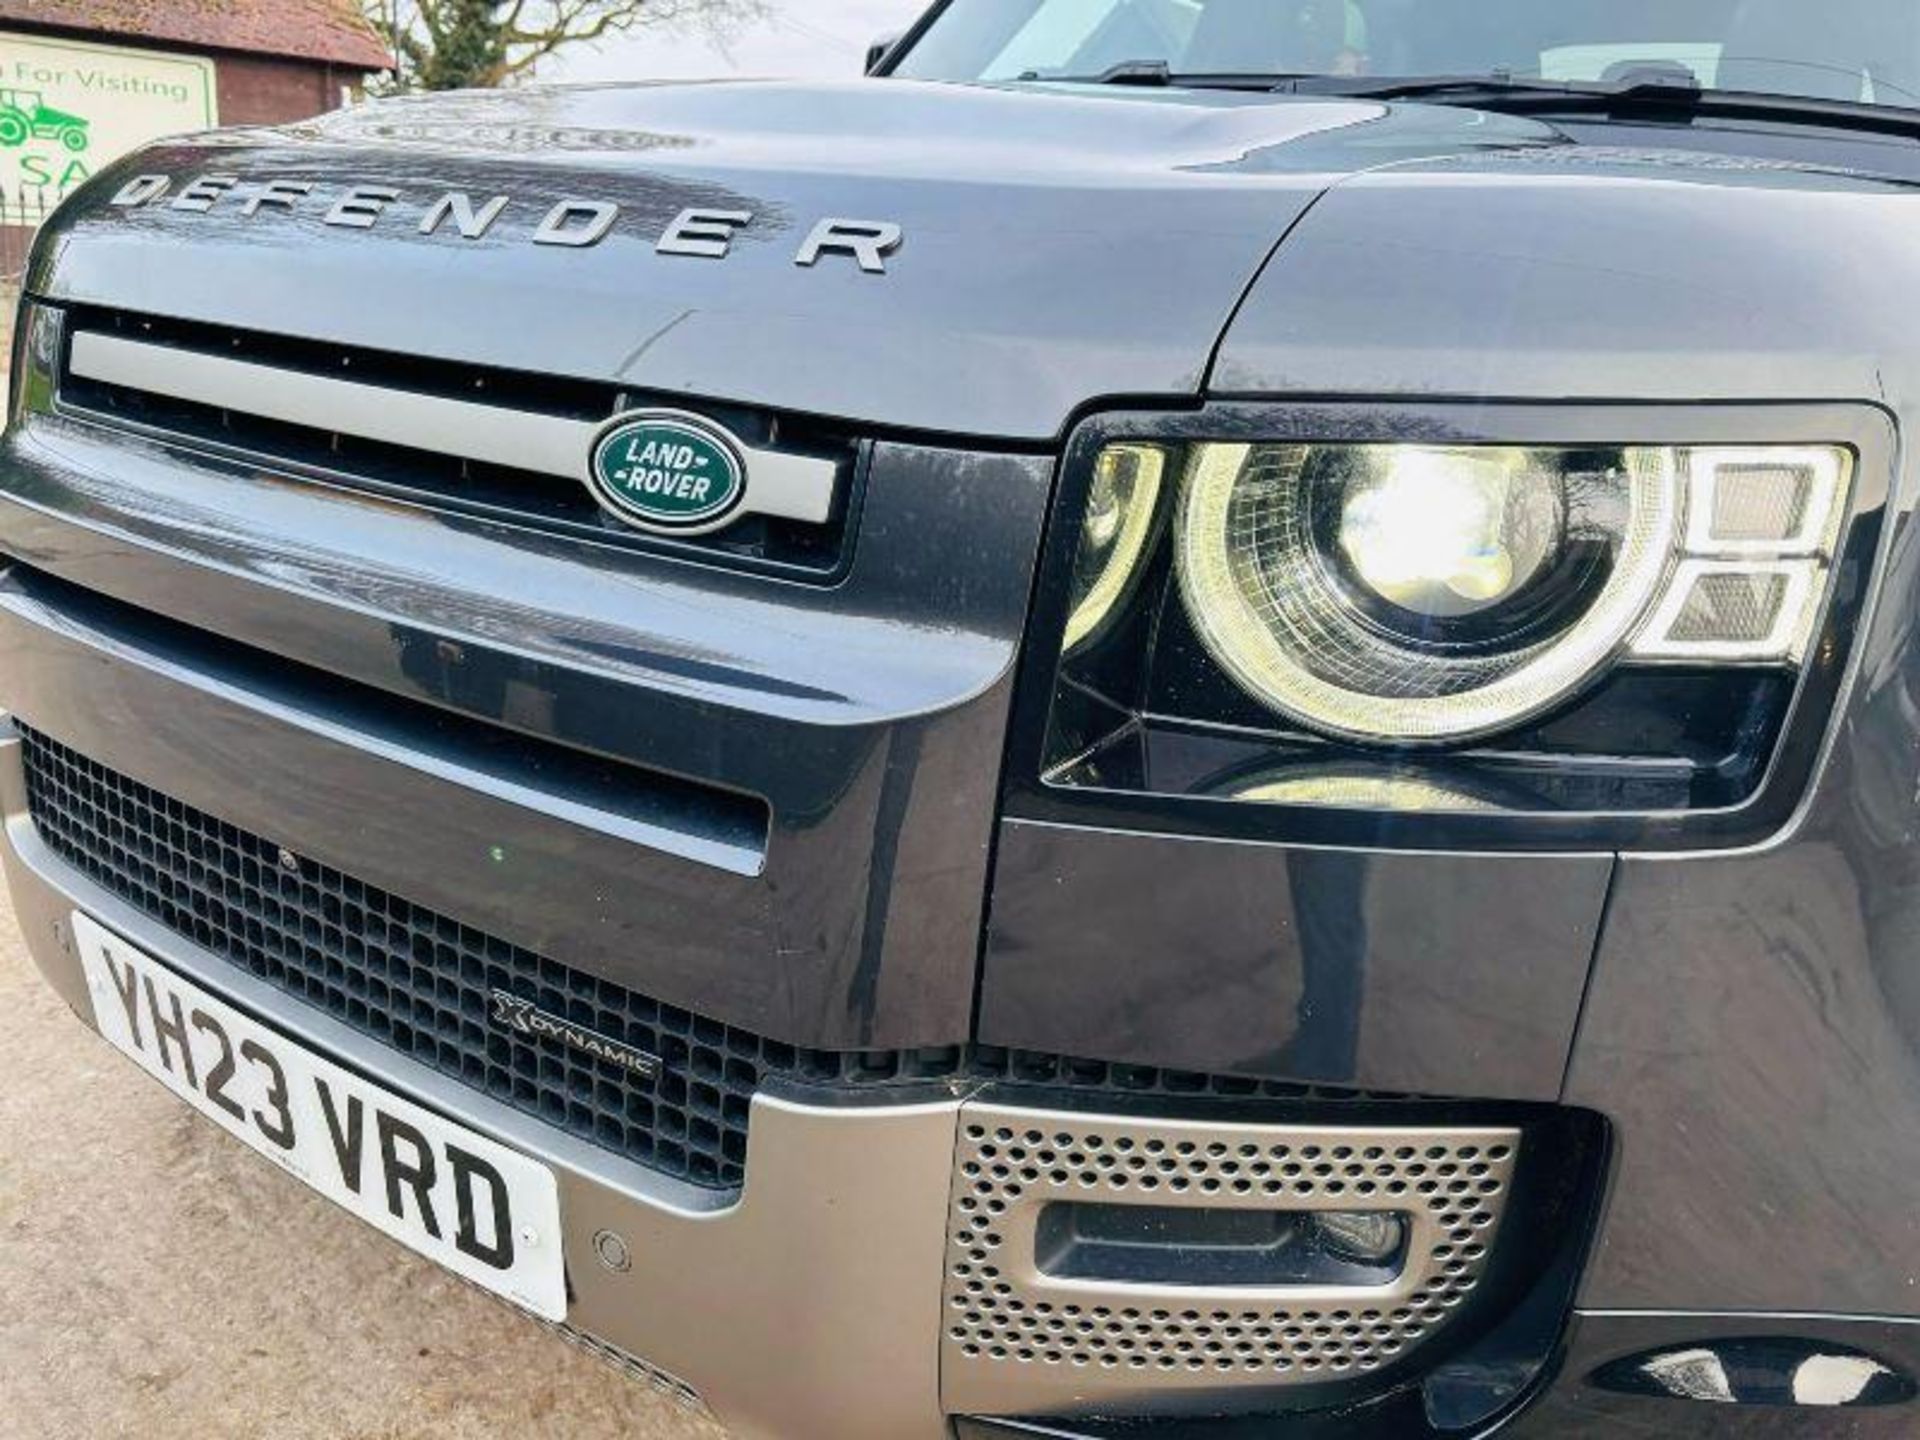 2023 LAND ROVER DEFENDER 90 XDYNAMIC S - 11074 MILES - C/W ELECTRIC TOW BAR. - Image 10 of 18